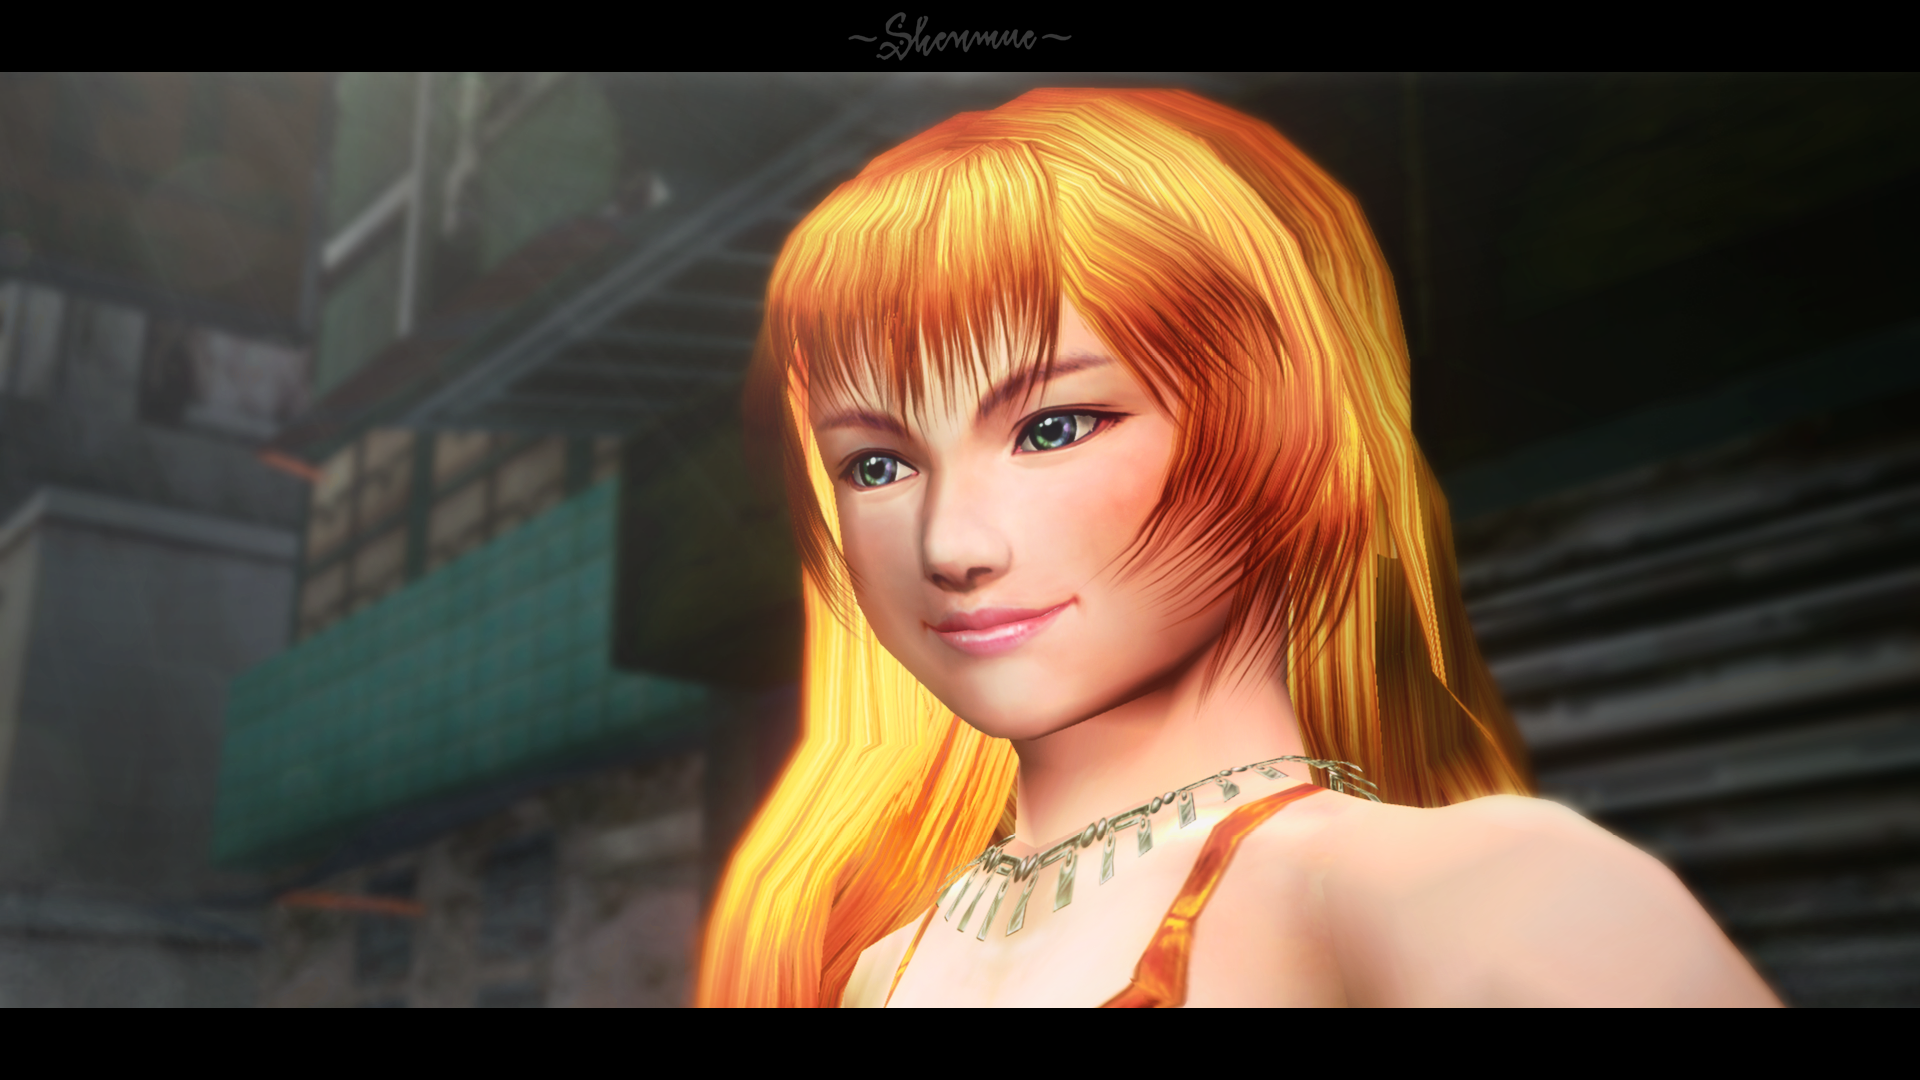 General 1920x1080 shenmue Sega Dreamcast video games smiling video game girls video game characters